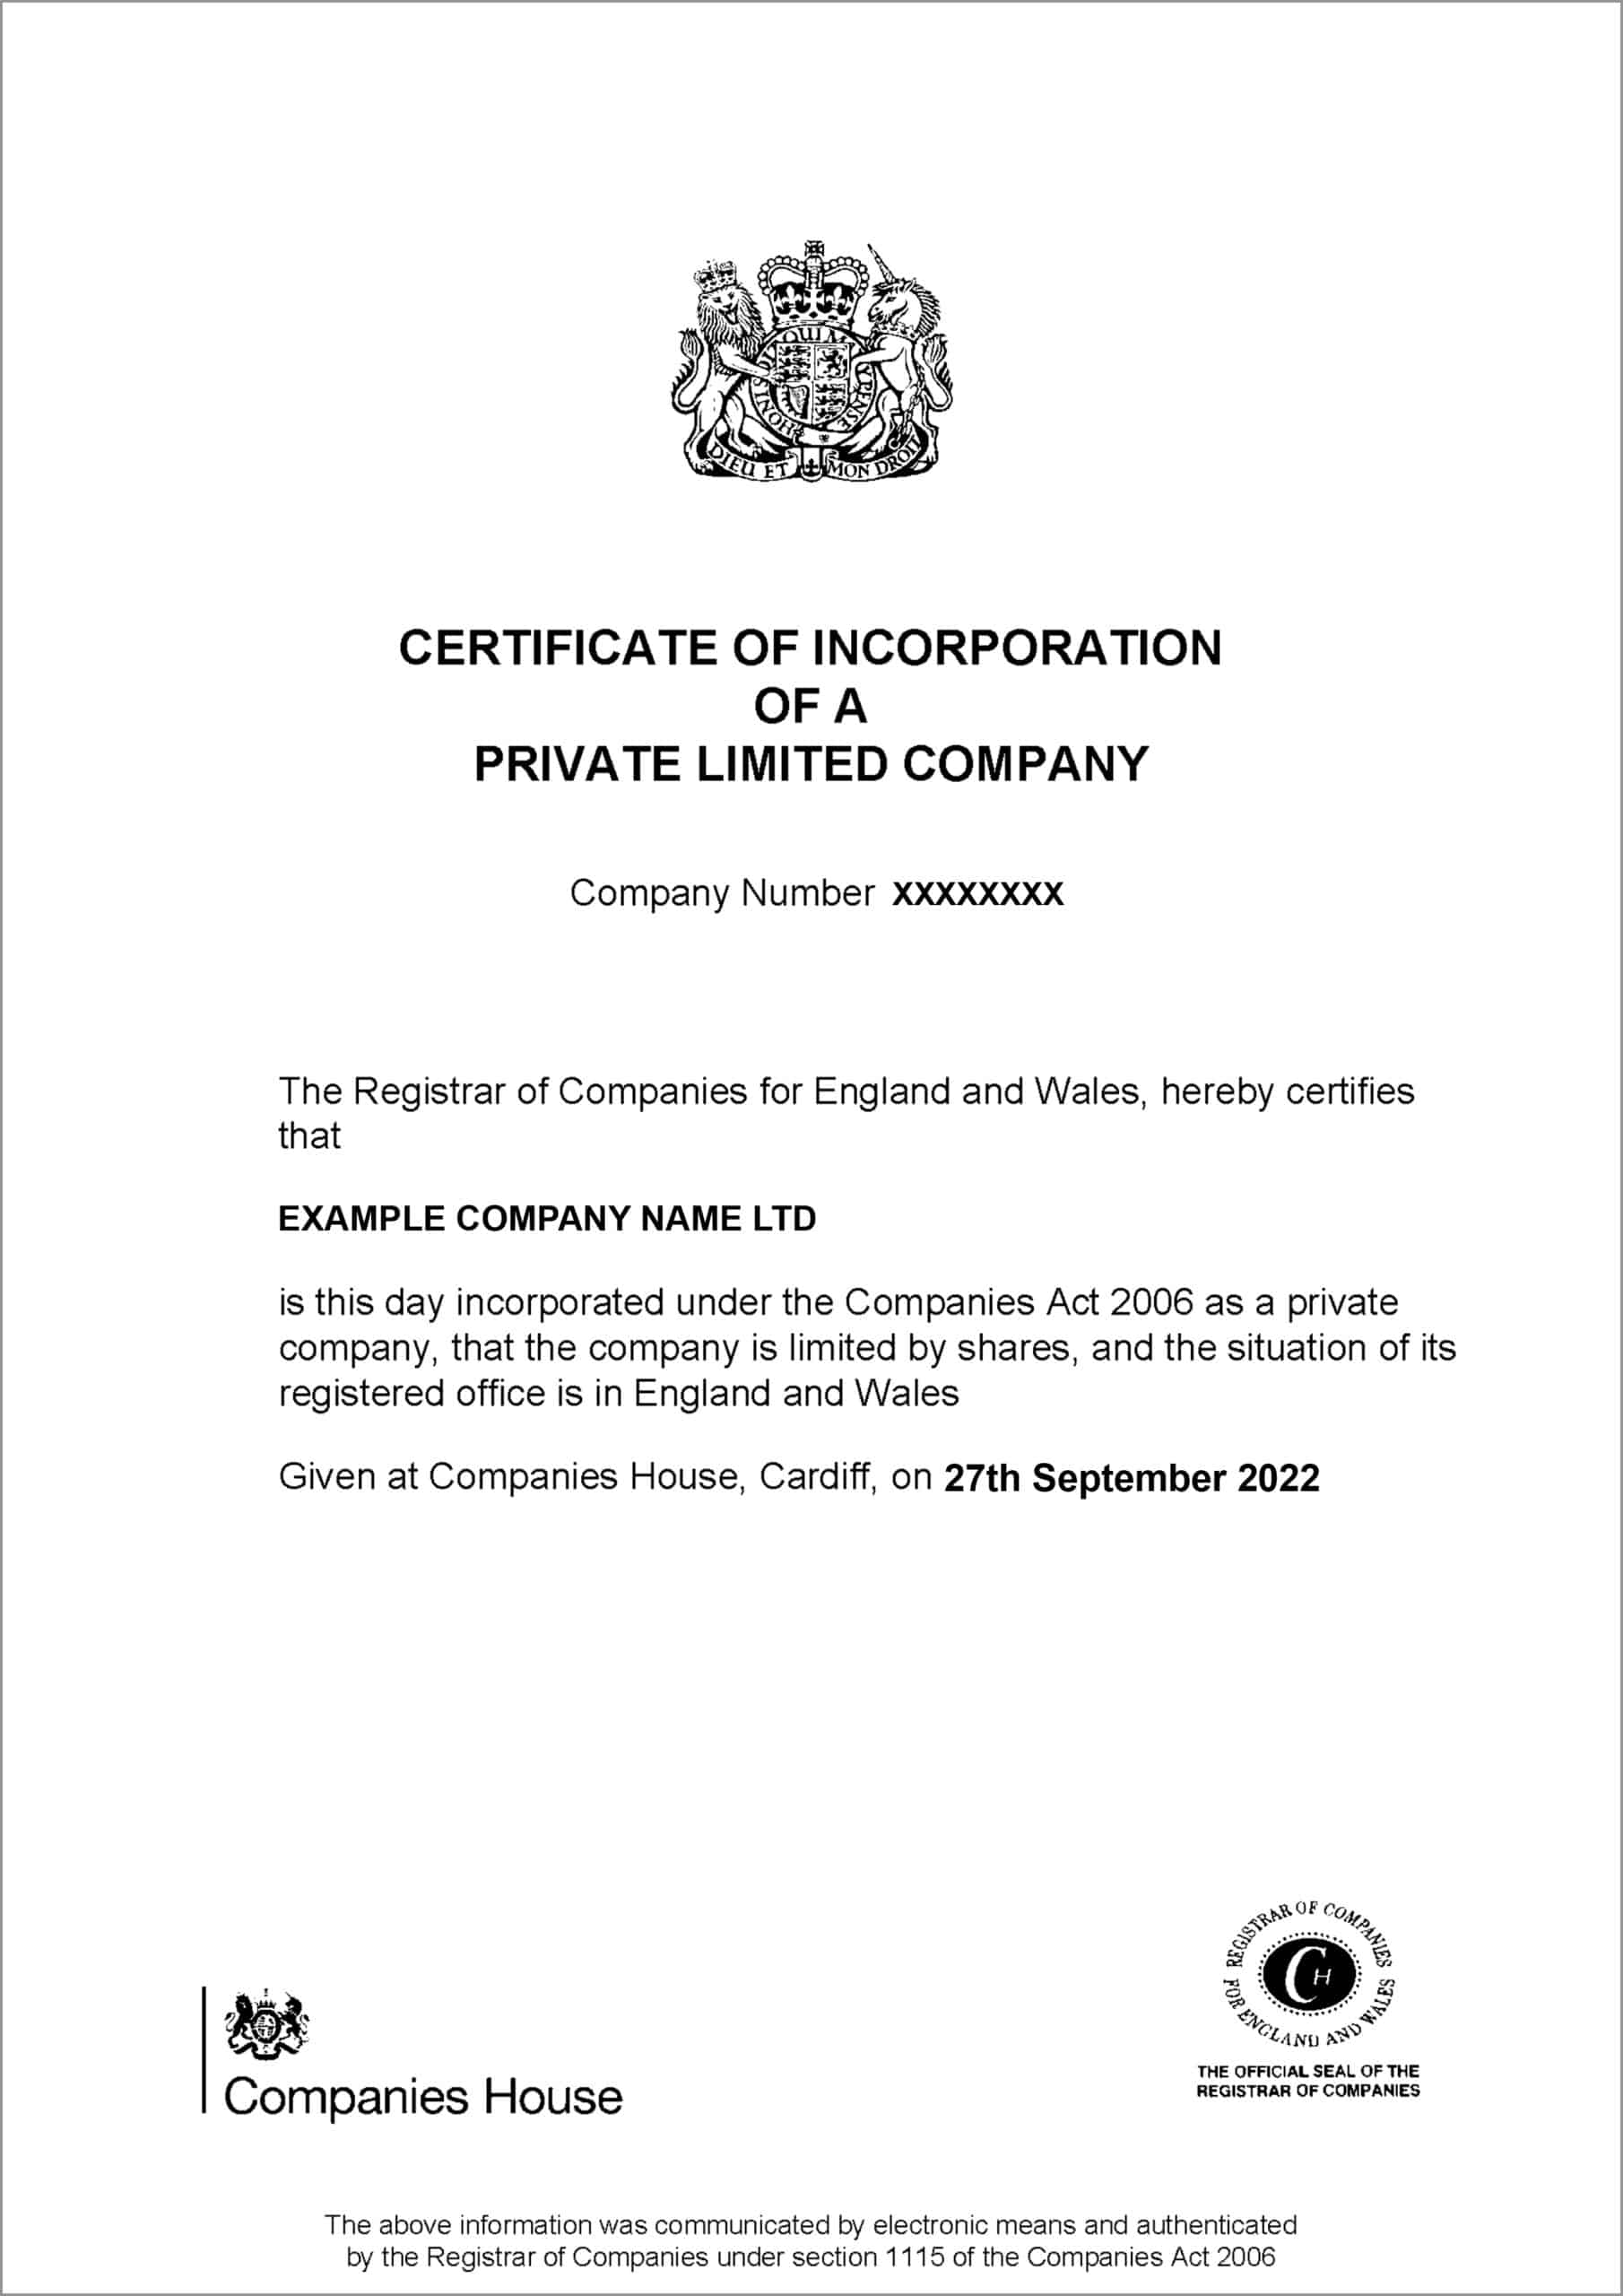 The certificate of incorporation document